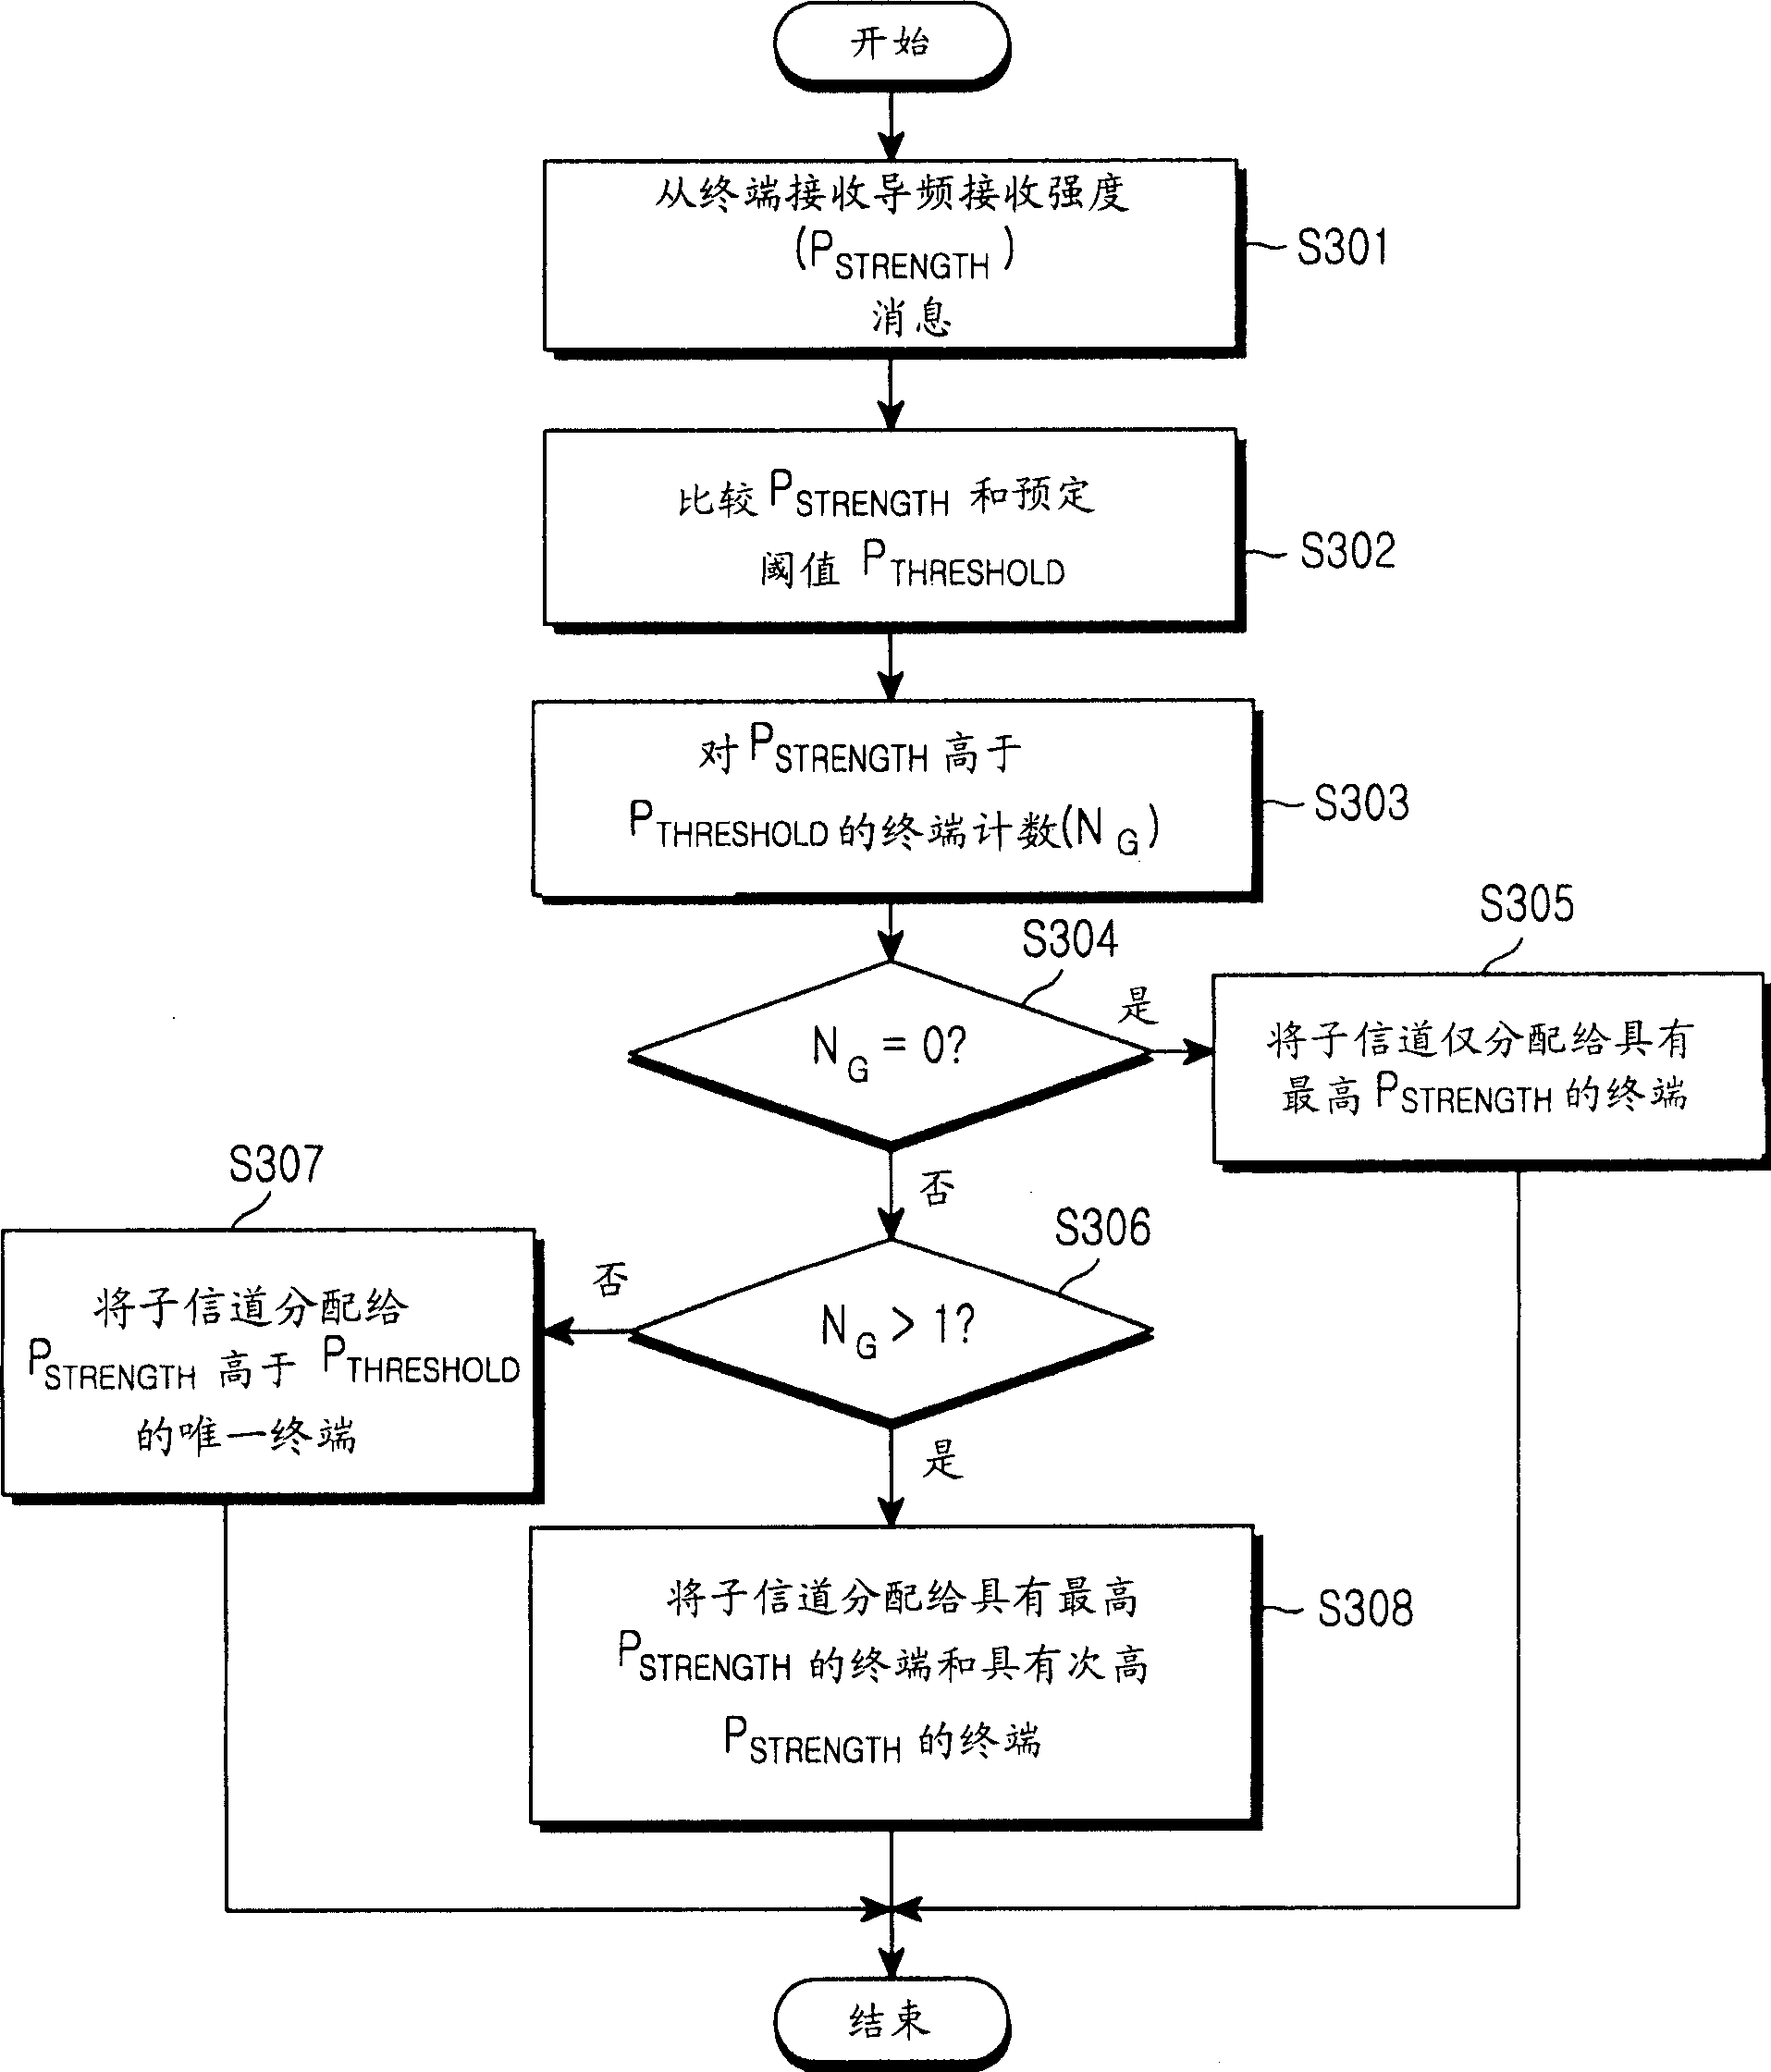 Resource allocation method for downlink transmission in a multicarrier-based CDMA communication system